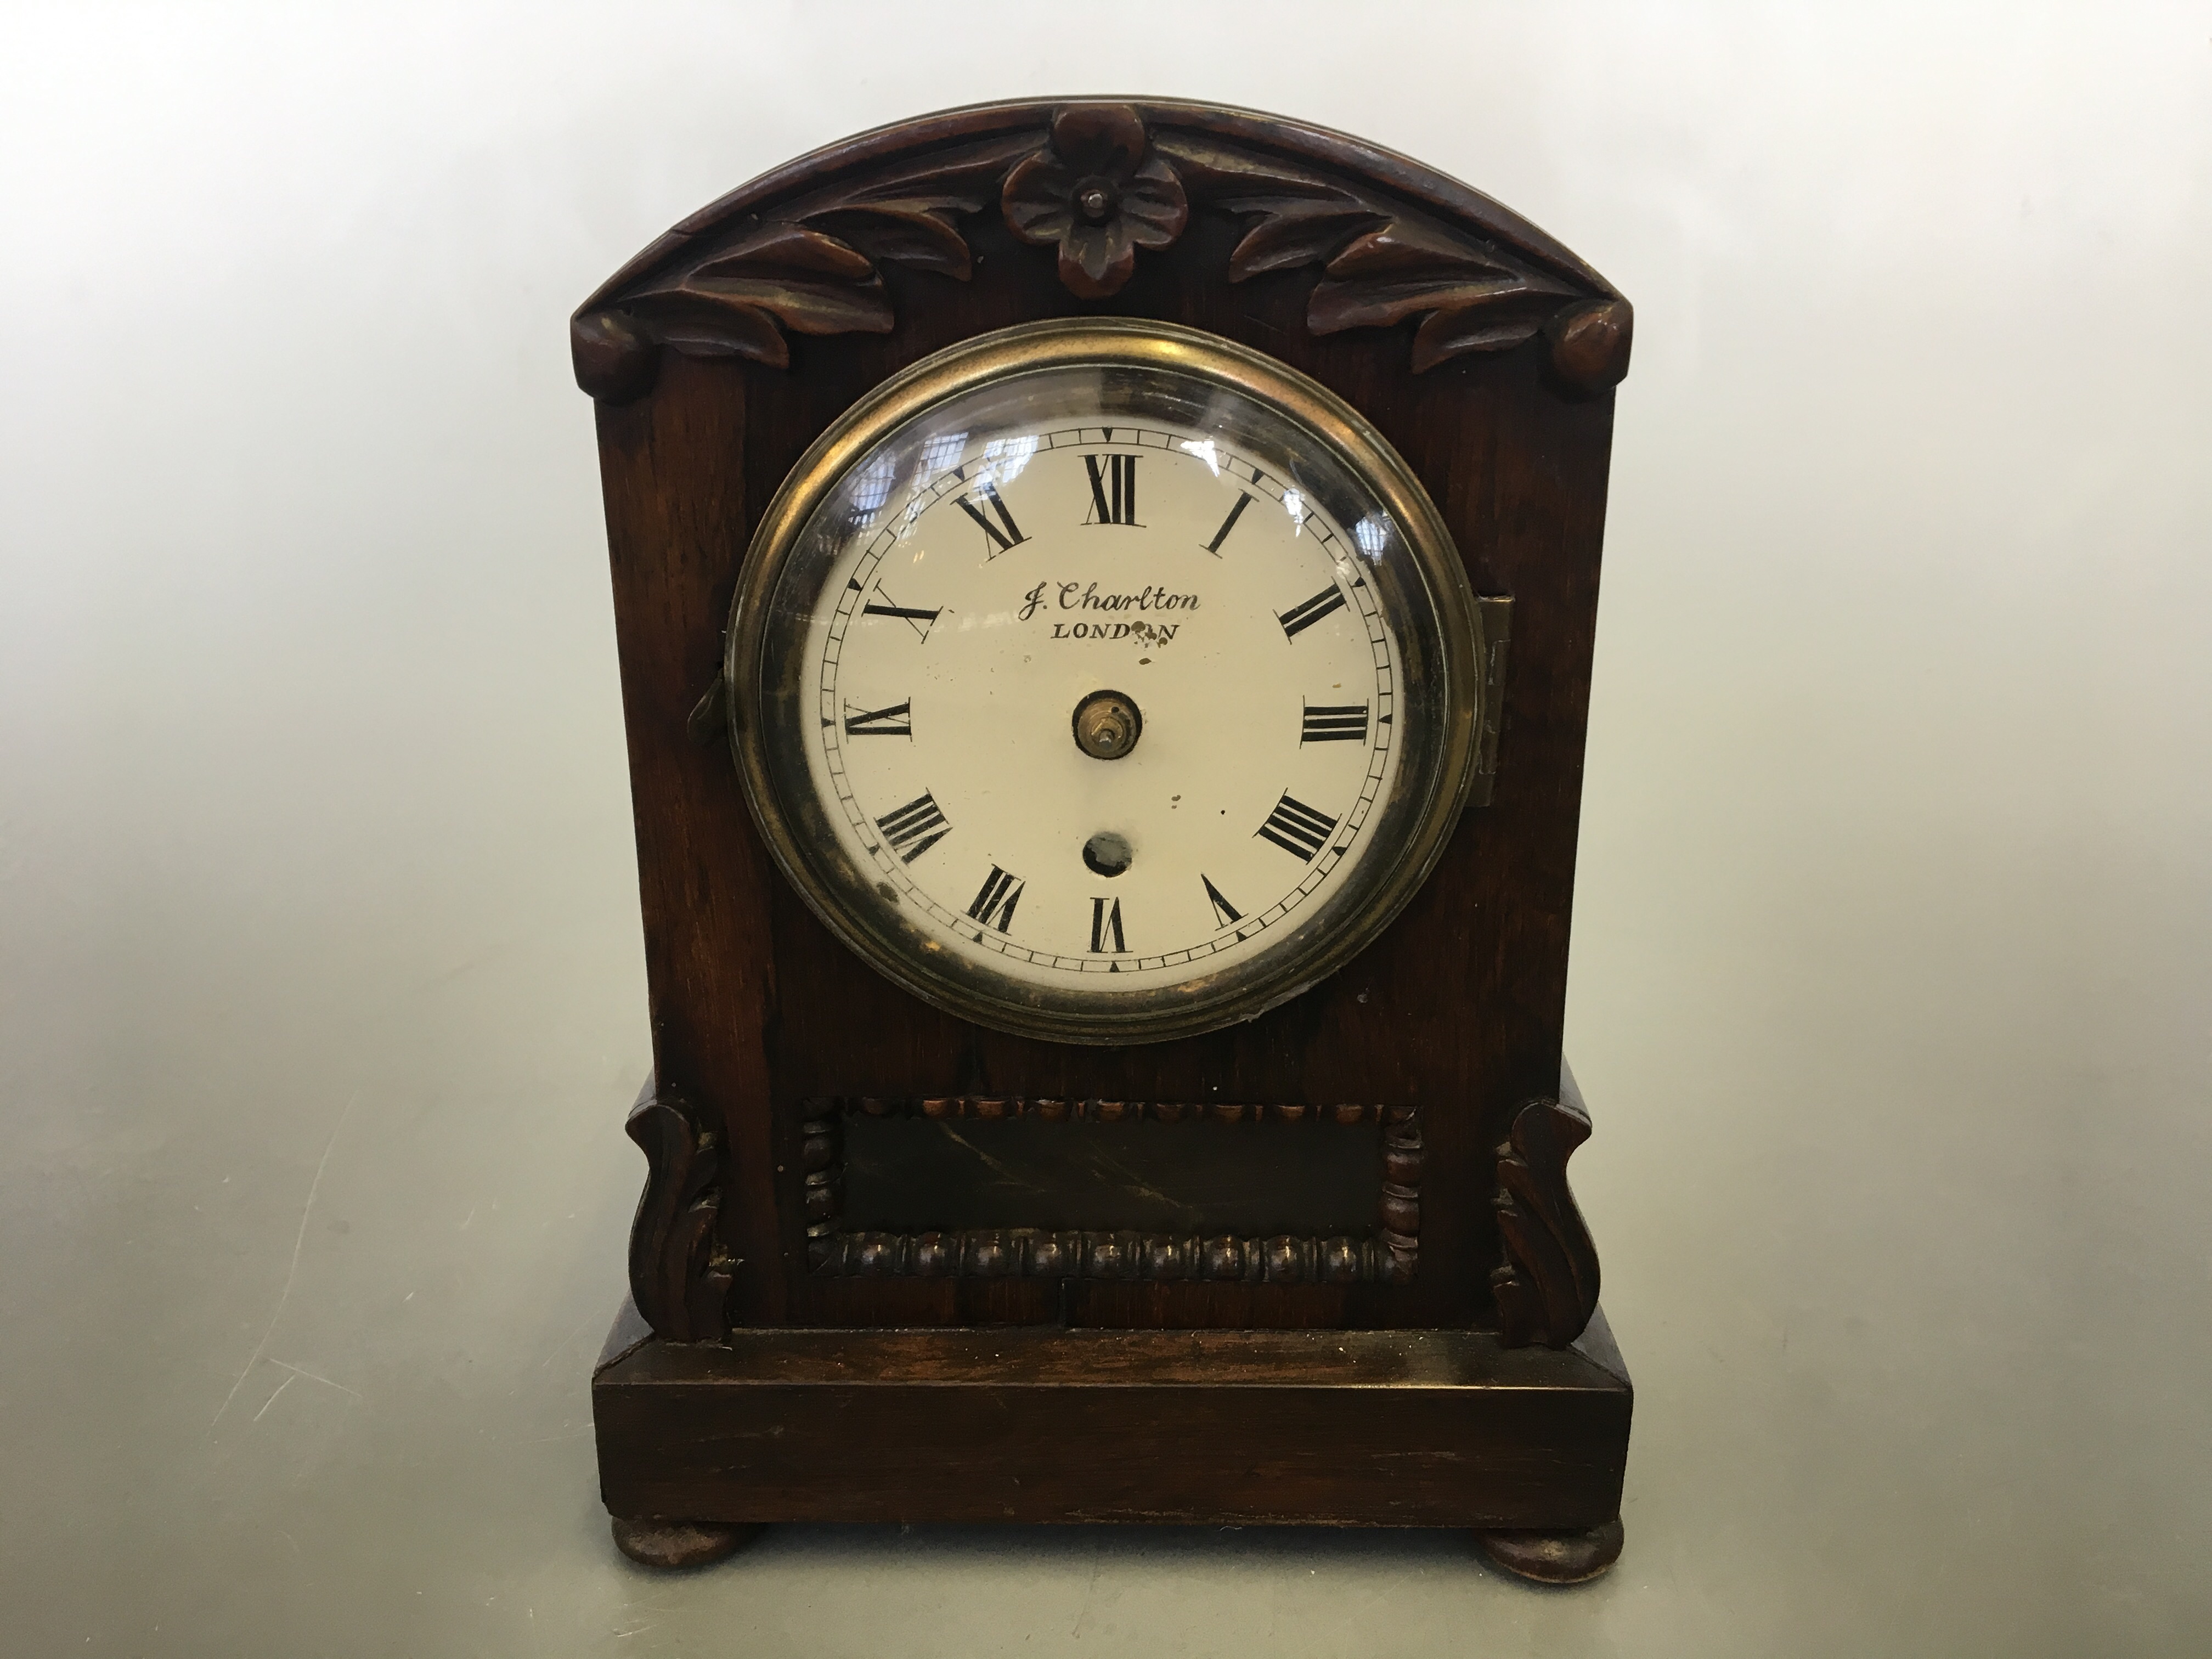 A J Charlton London small bracket clock in rosewood case with a subtle fused movement, with leaf and